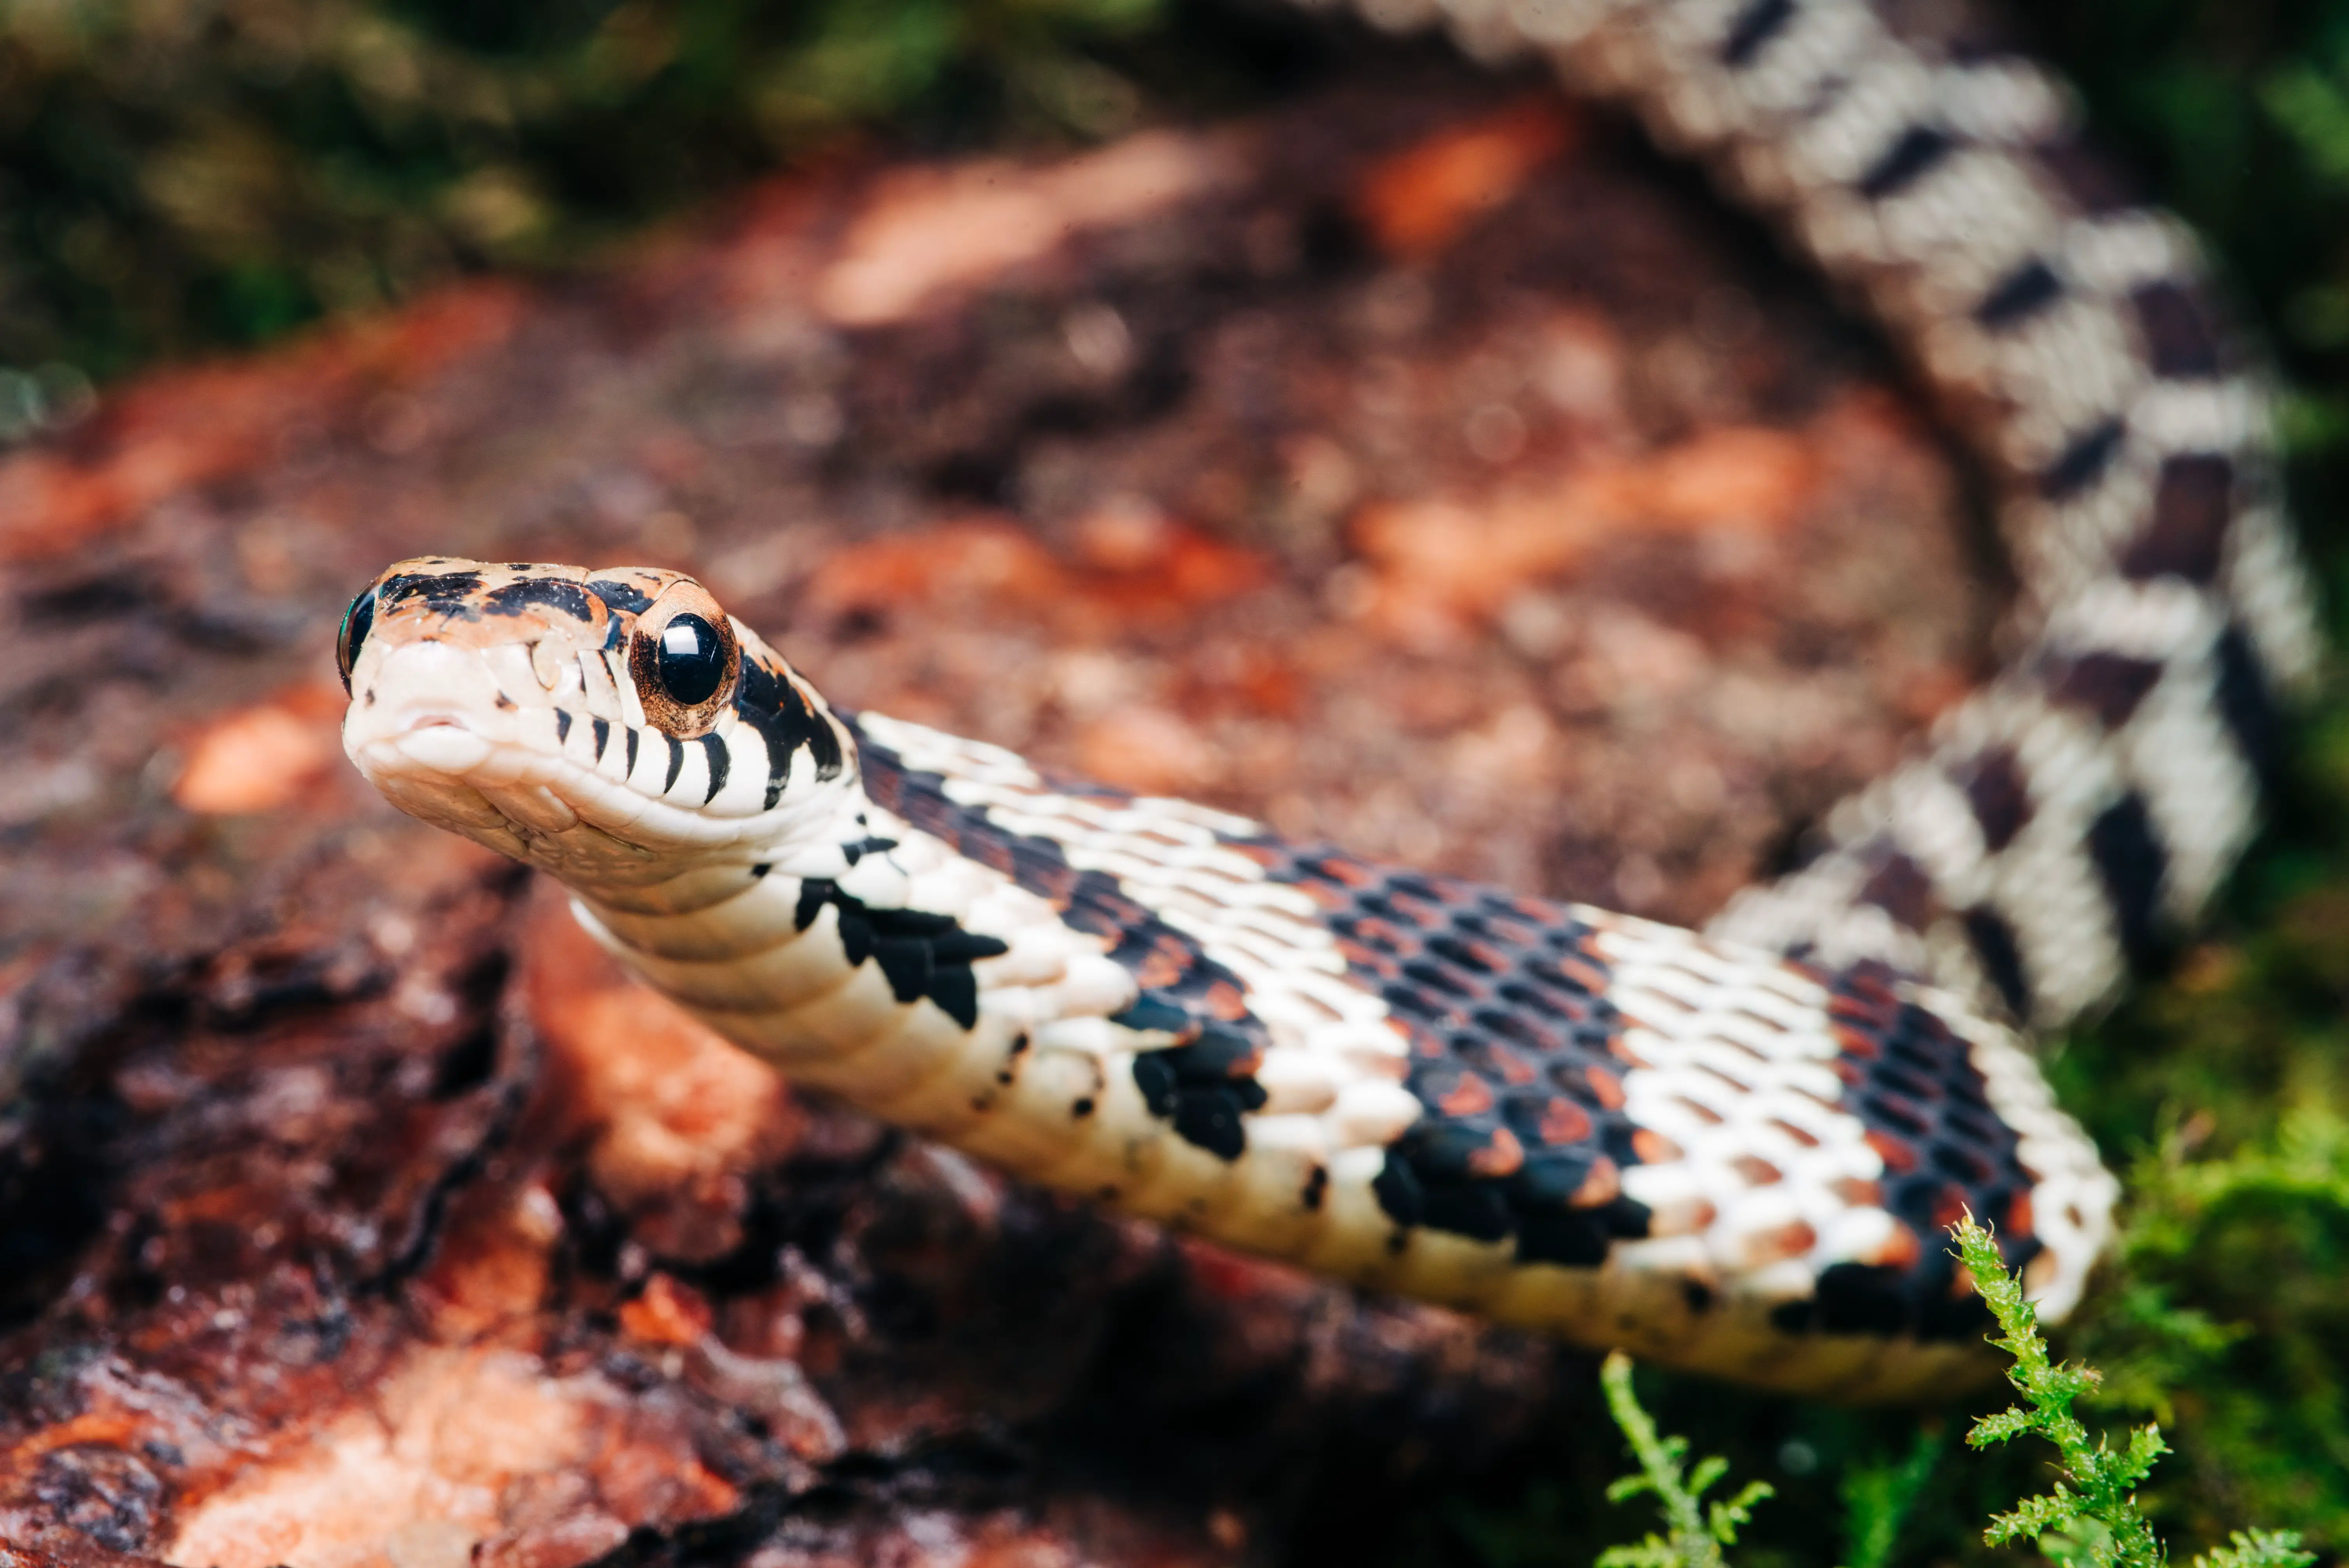 Unraveling the Mysterious Meaning of Snakes in Hindu Astrology Dreams